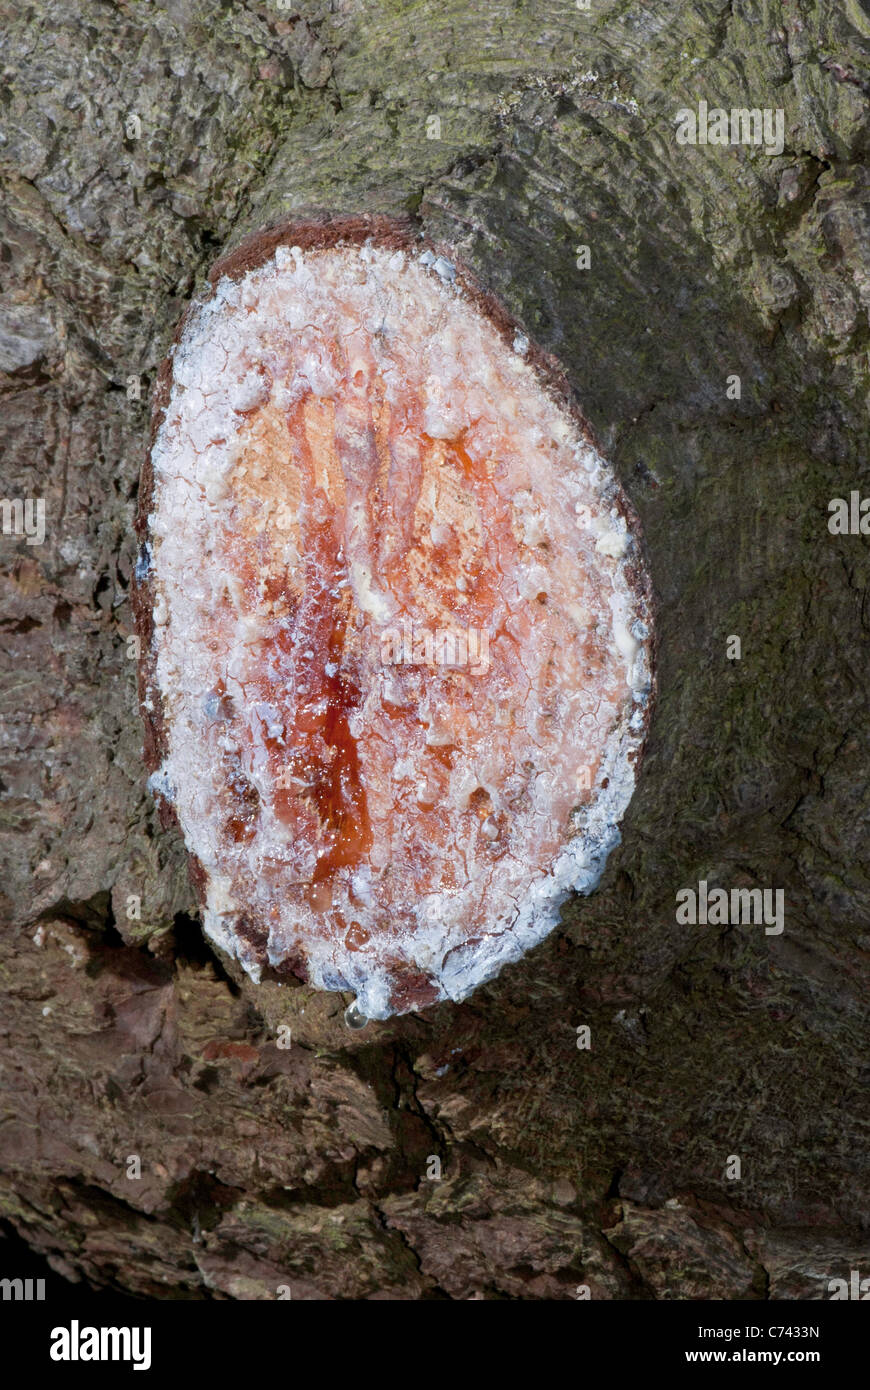 A cut branch on a pine tree which is weeping sap or resin. Stock Photo